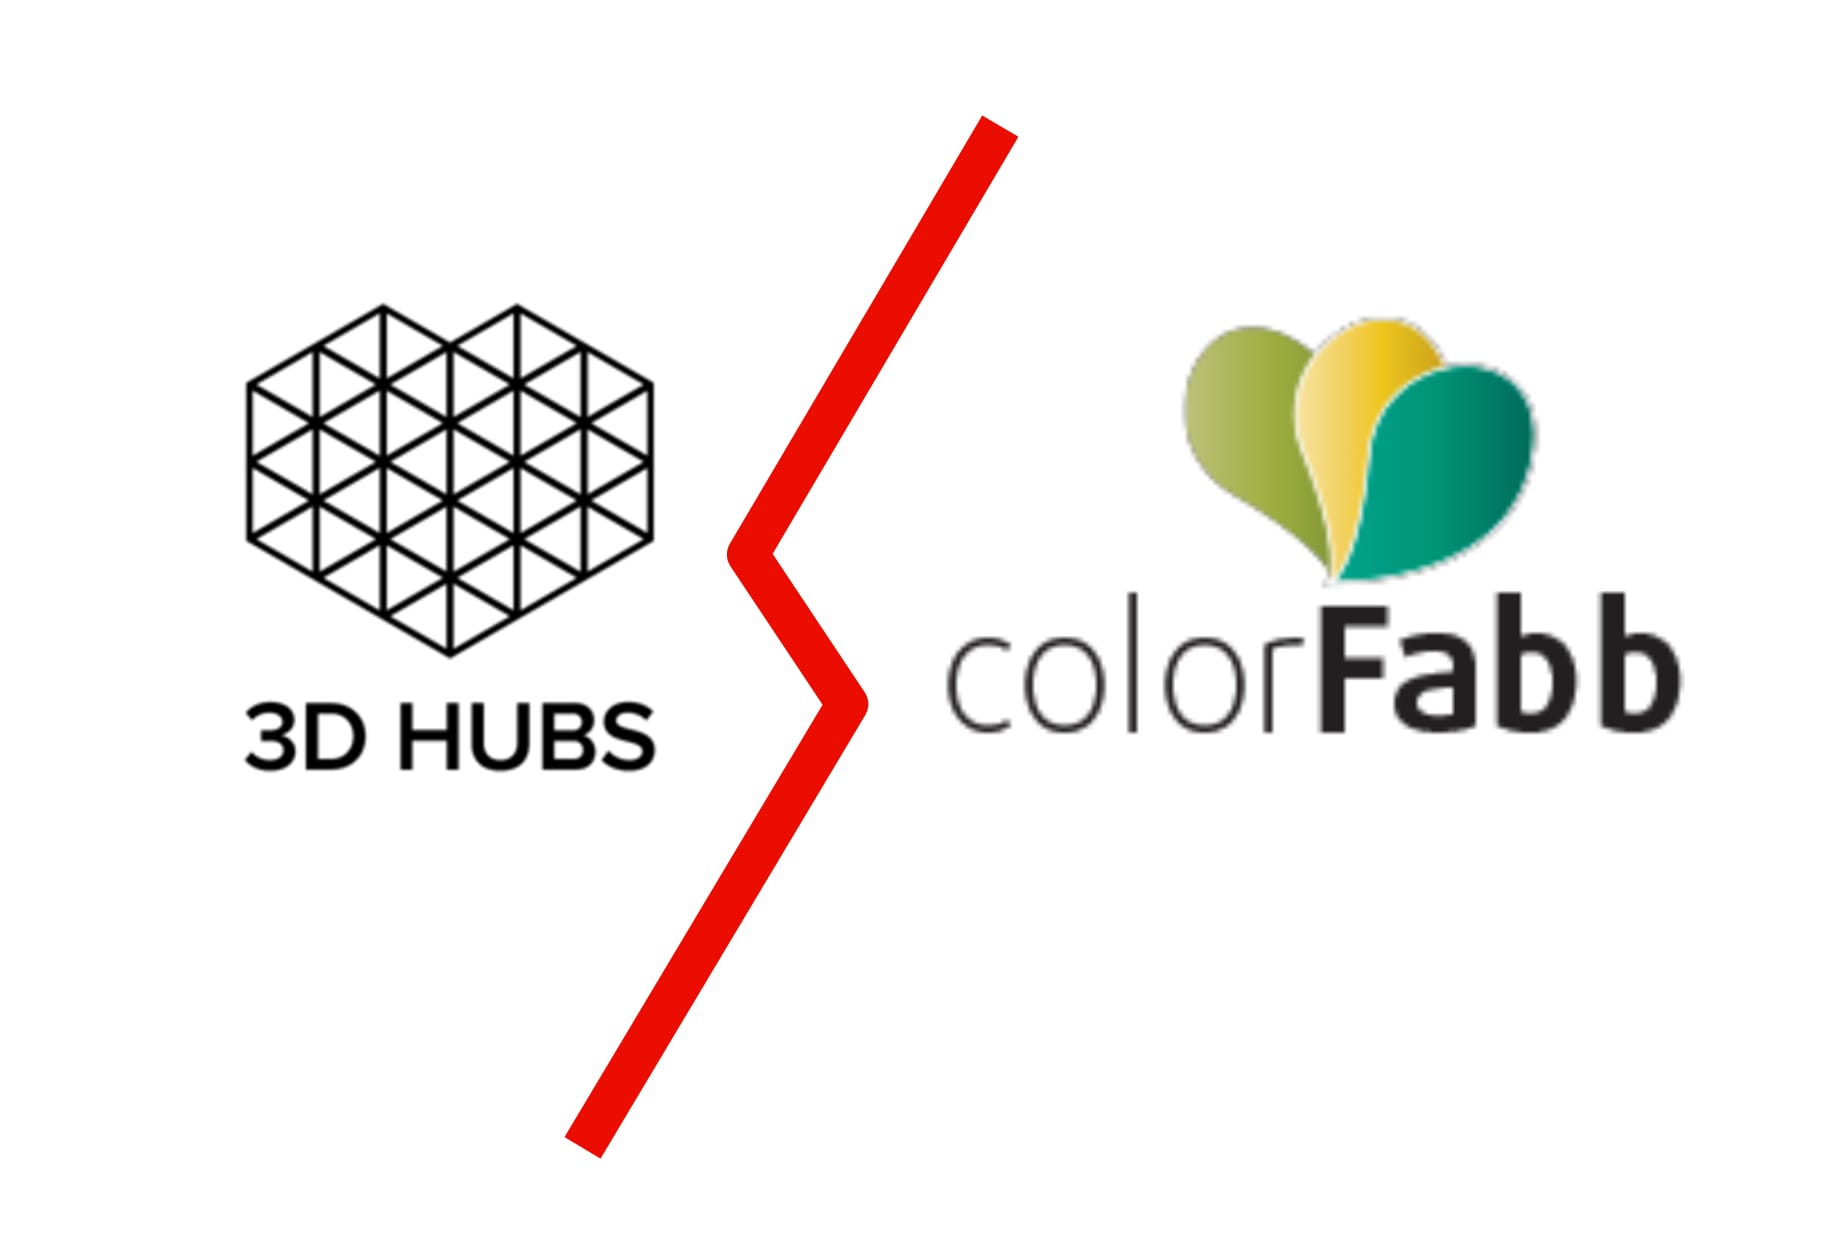  Changes between colorFabb and 3D Hubs 